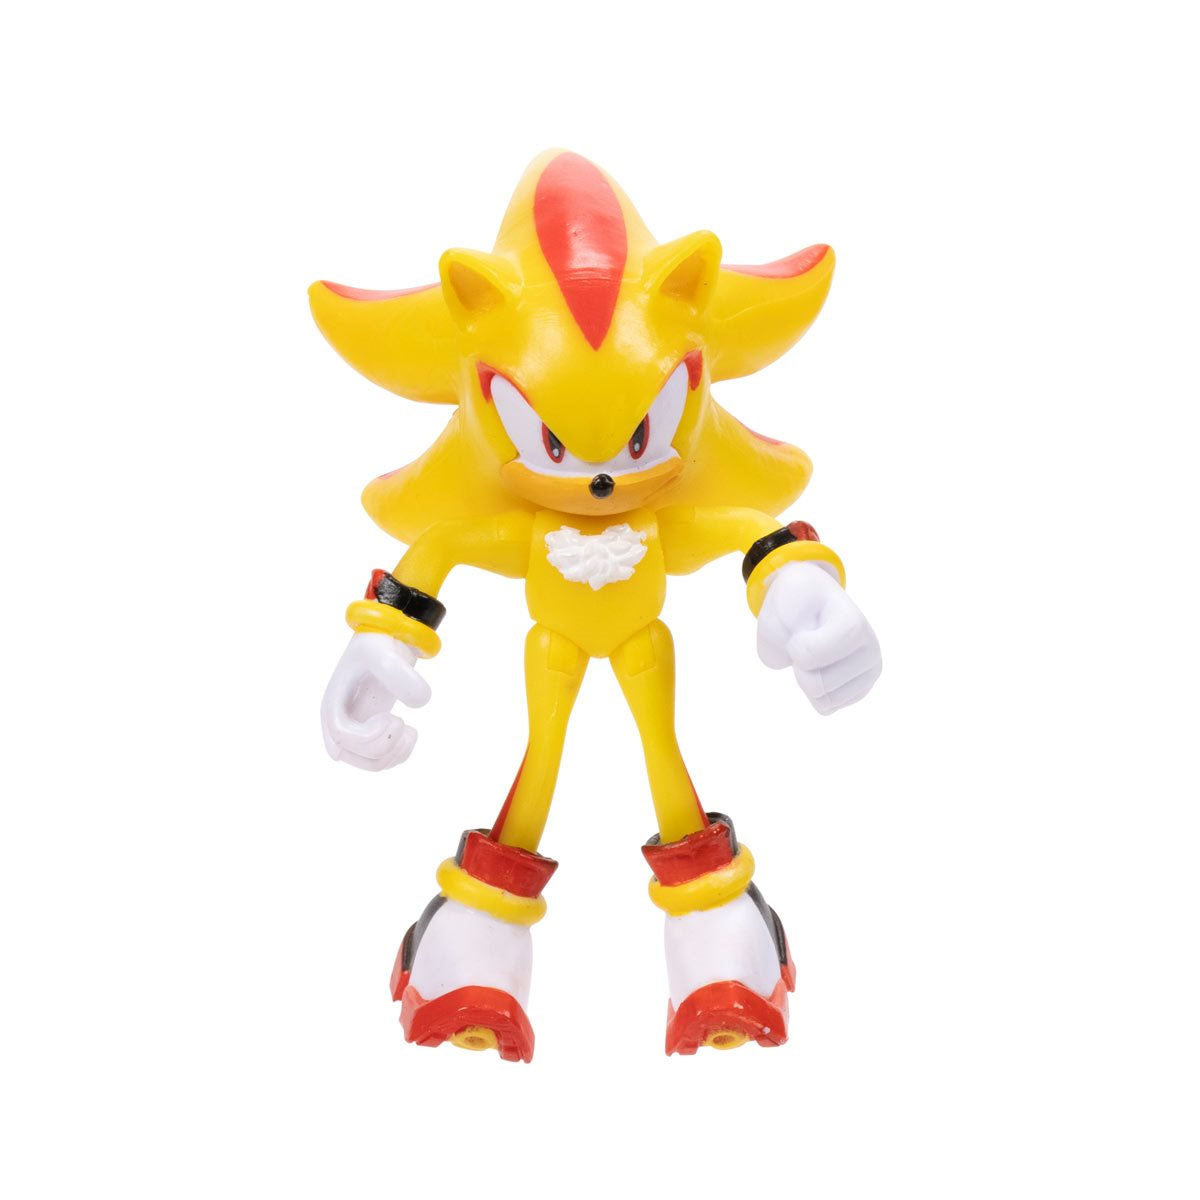 Sonic The Hedgehog Action Figure Toy – Shadow Figure with Sonic, Knuckles,  Amy Rose, and Shadow Figure. 4 inch Action Figures - Sonic The Hedgehog